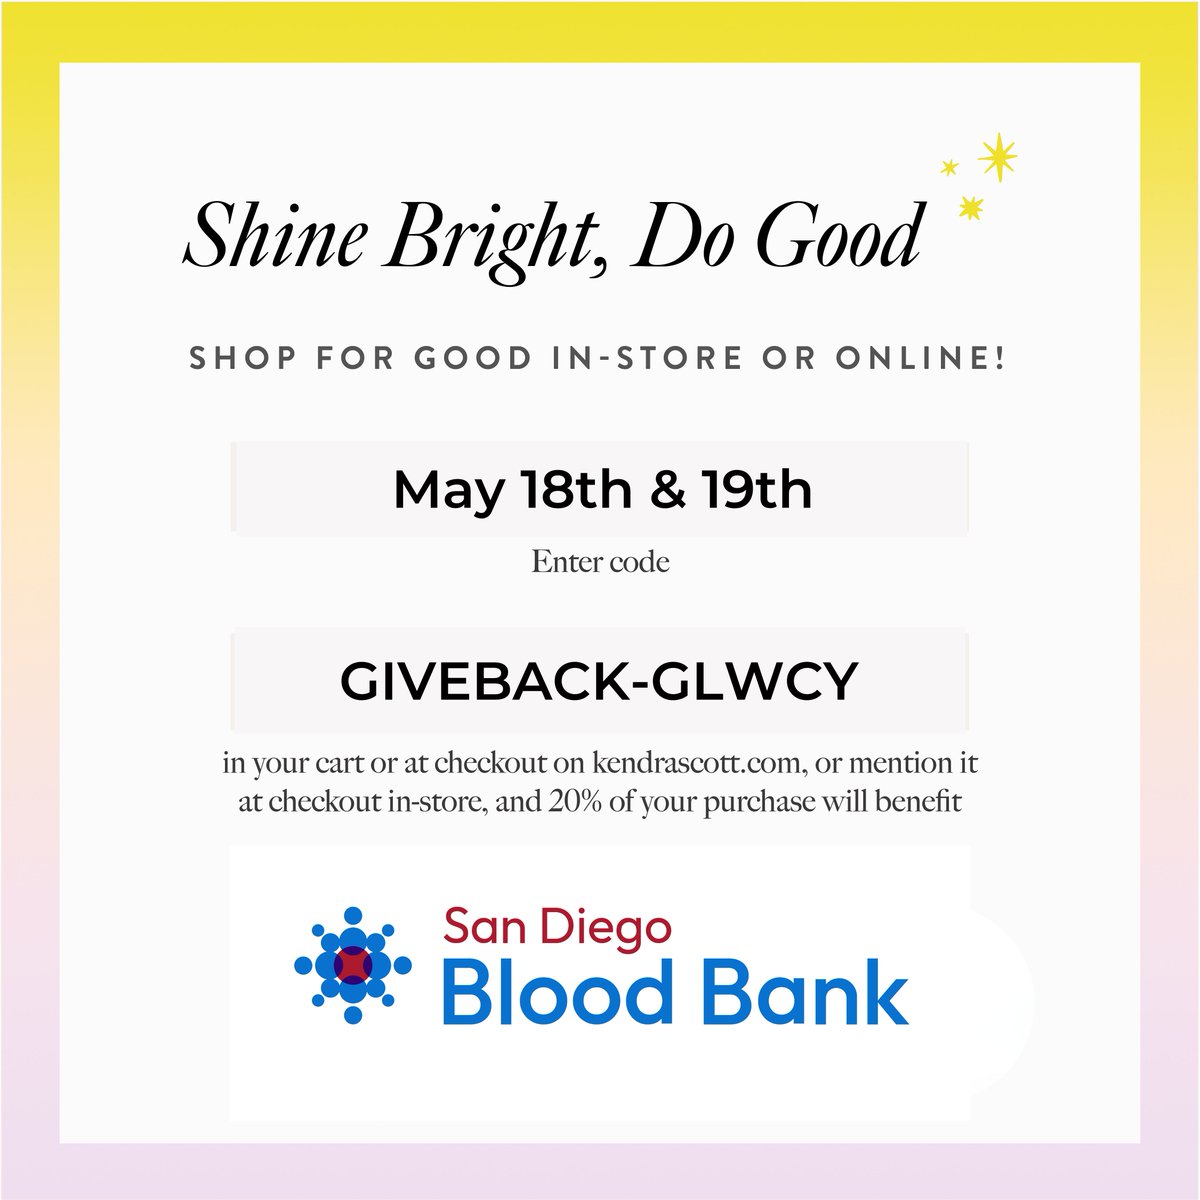 🌟Shine Bright, Do Good with @KendraScott, and support @sdbloodbank's Cord Blood Program May 18-19! 20% of proceeds benefit our lifesaving mission. 🛍️IN-STORE 5/18 Mention SDBB: UTC: 12p–2p | Fashion Valley: 2p–4p 🛍️ONLINE 5/18-19: hubs.ly/Q02xhspz0 code: GIVEBACK-GLWCY